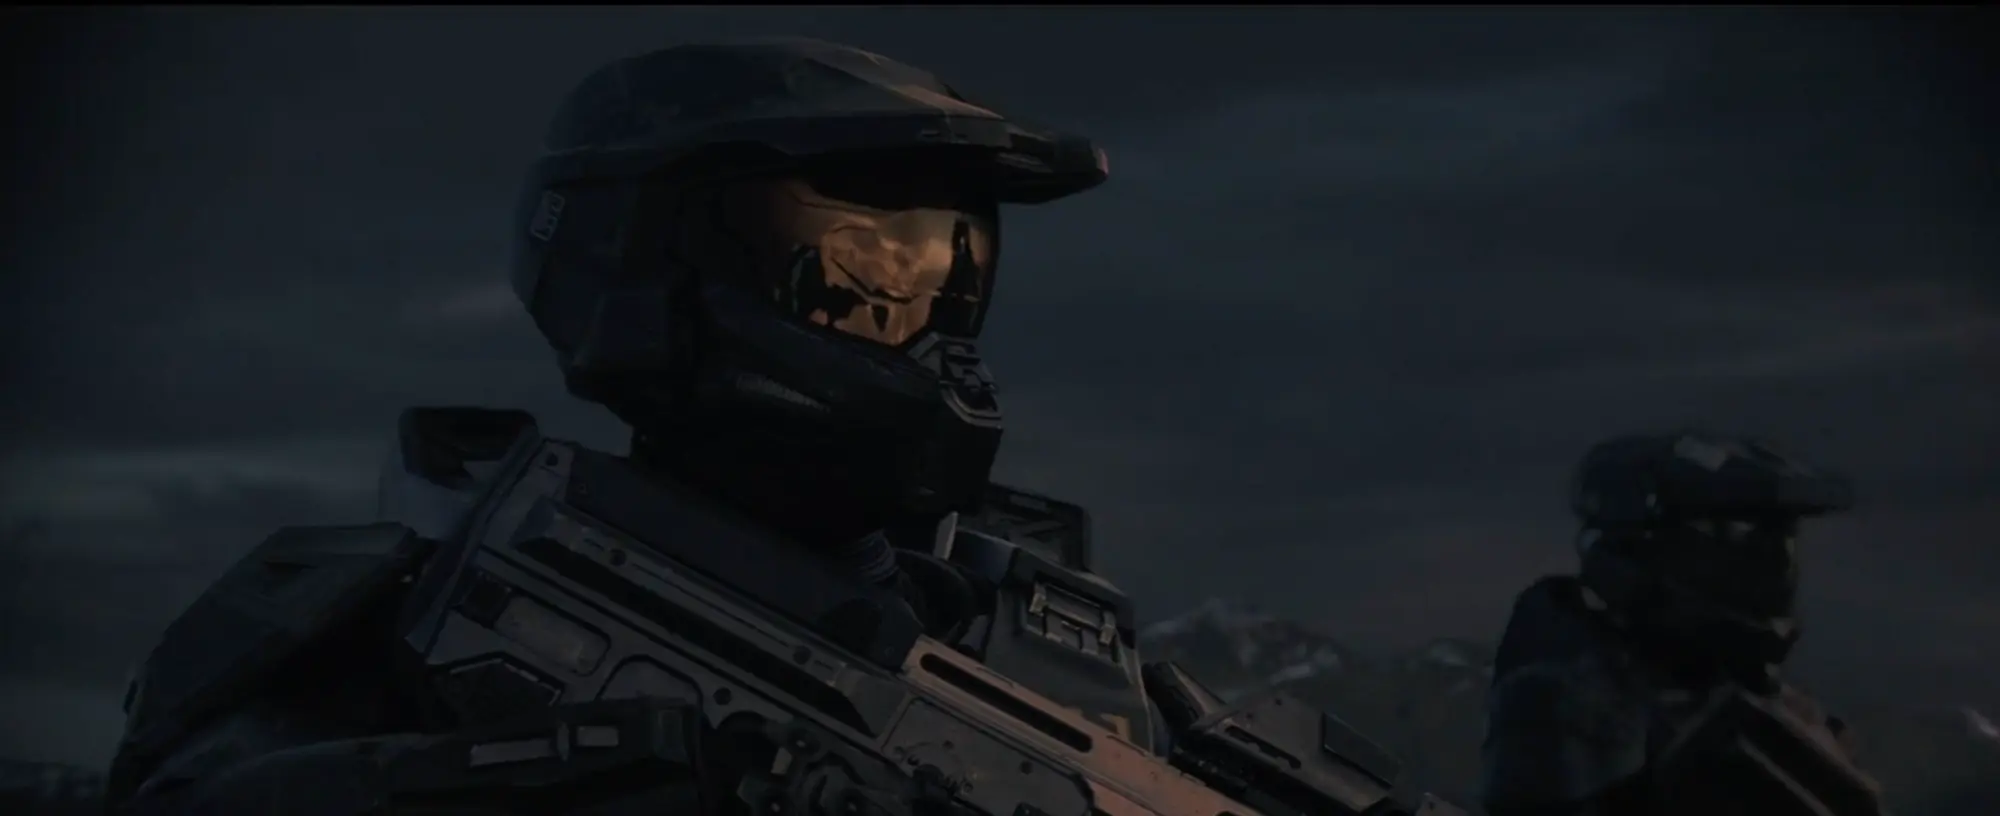 Screen from Halo 2